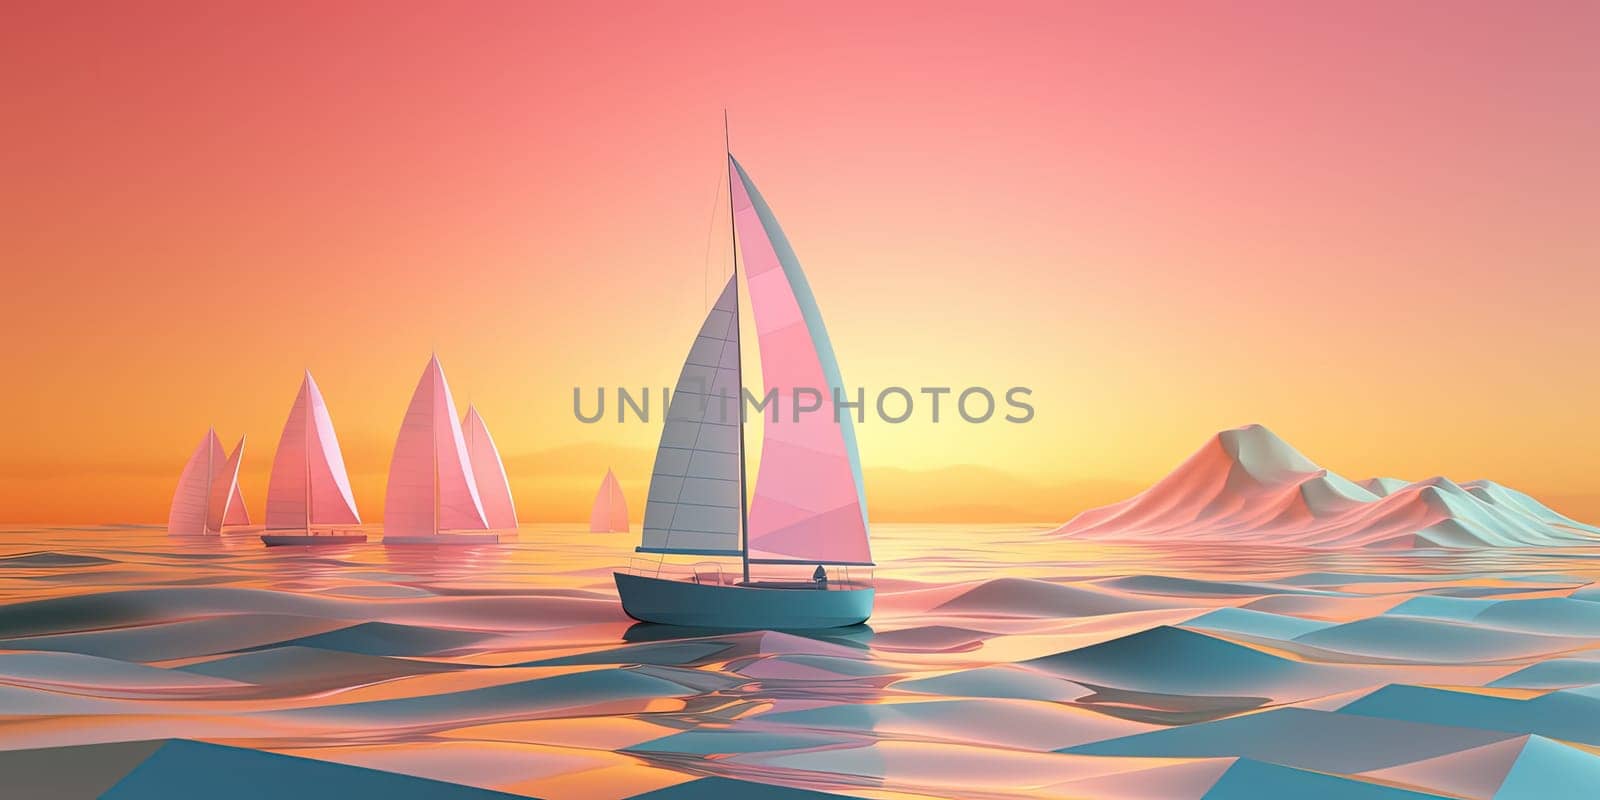 Amazing seascape with a solitary yacht at sunset by tan4ikk1